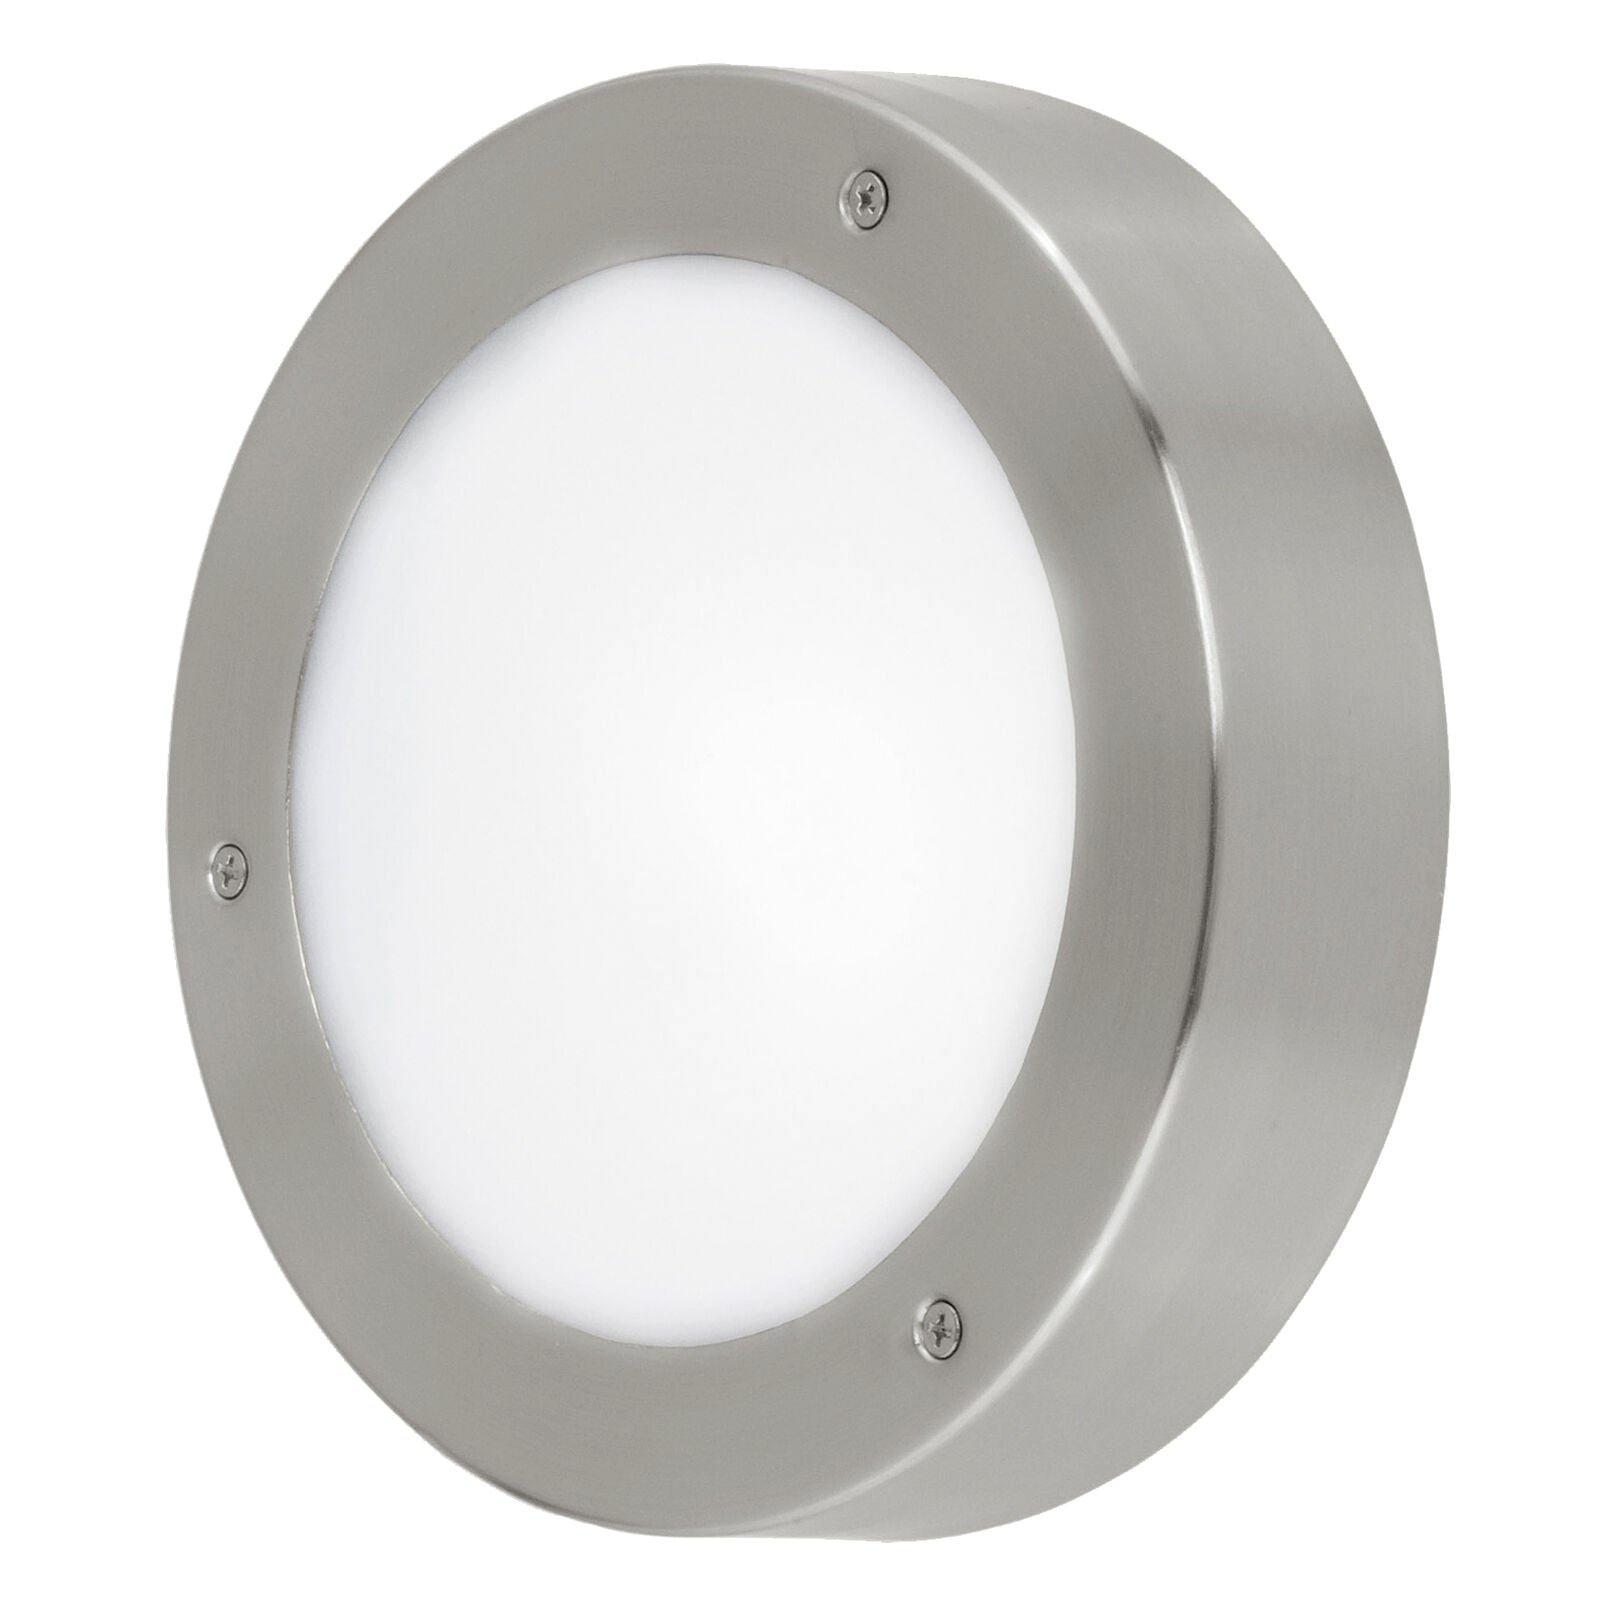 IP44 Outdoor Wall Light Stainless Steel 5.4W Built in LED Porch Lamp